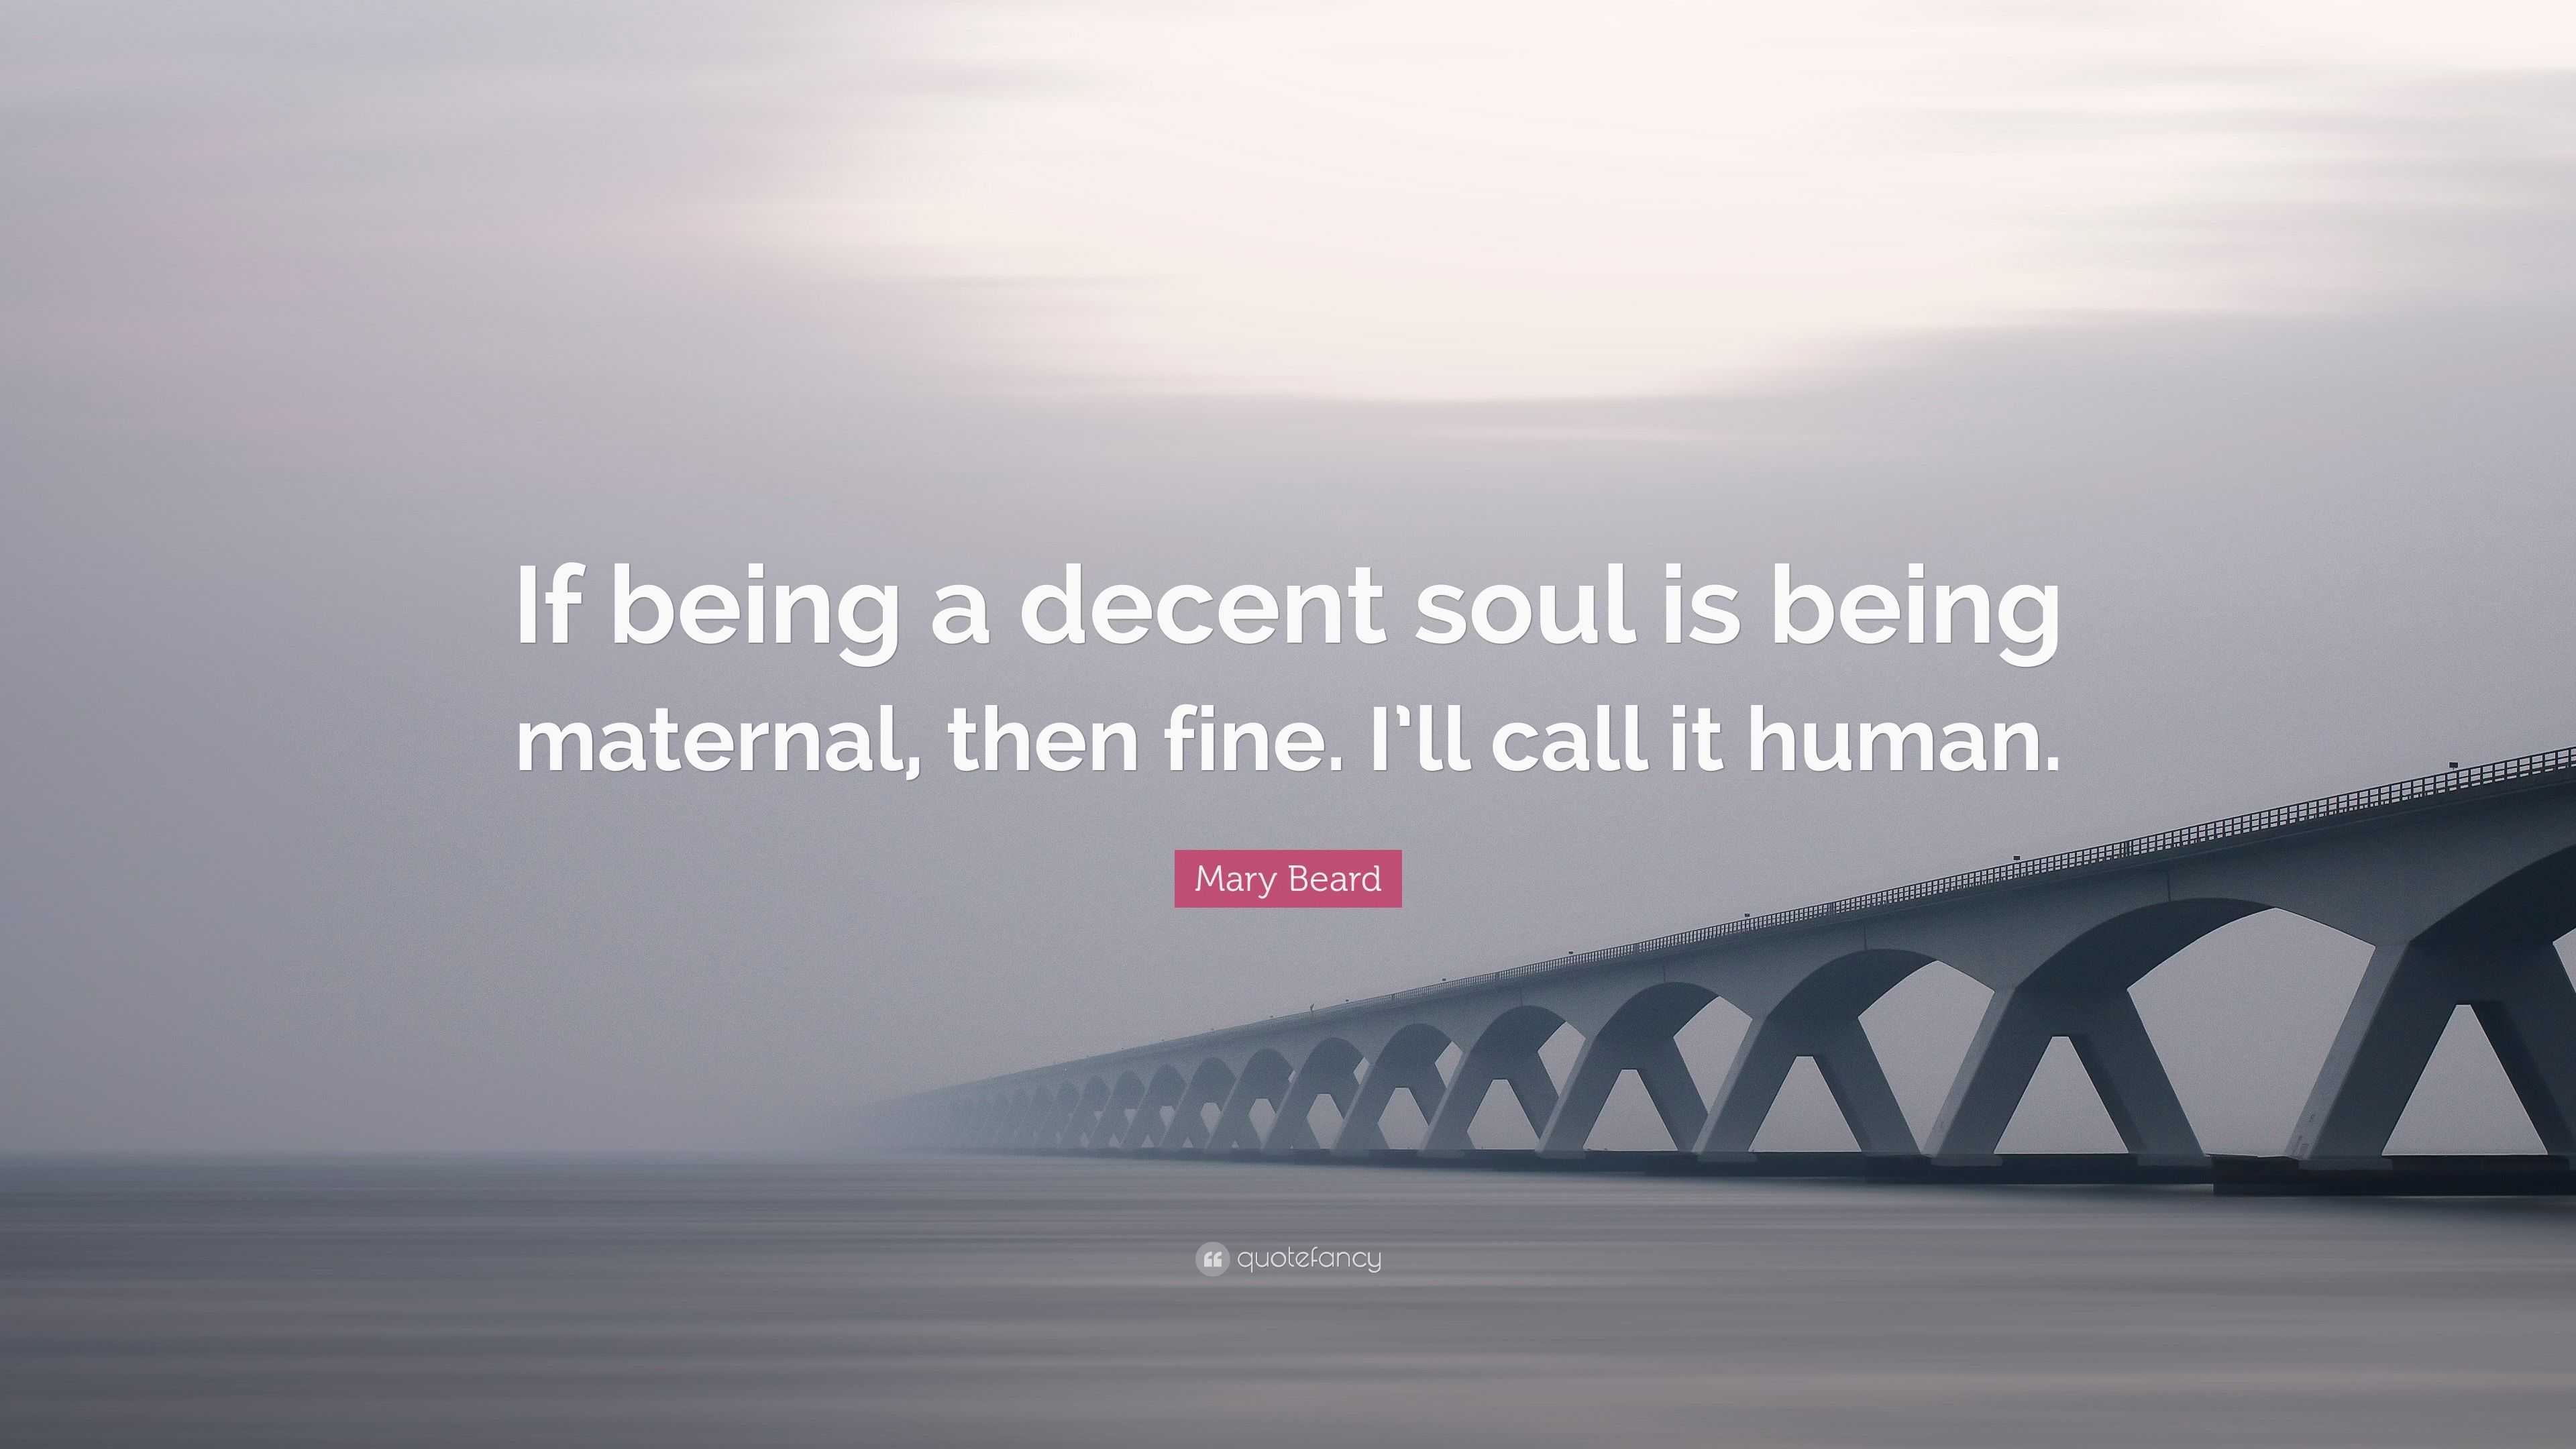 Mary Beard Quote: “If being a decent soul is being maternal, then fine ...